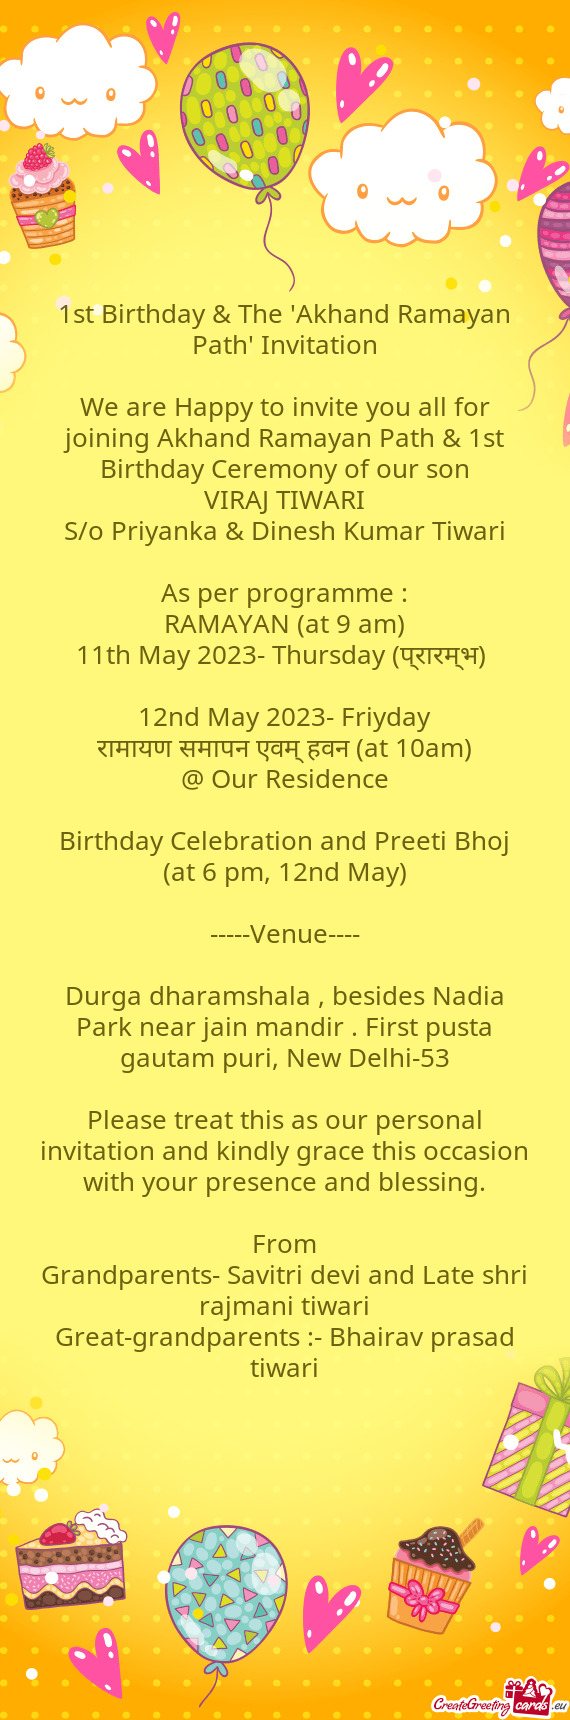 We are Happy to invite you all for joining Akhand Ramayan Path & 1st Birthday Ceremony of our son